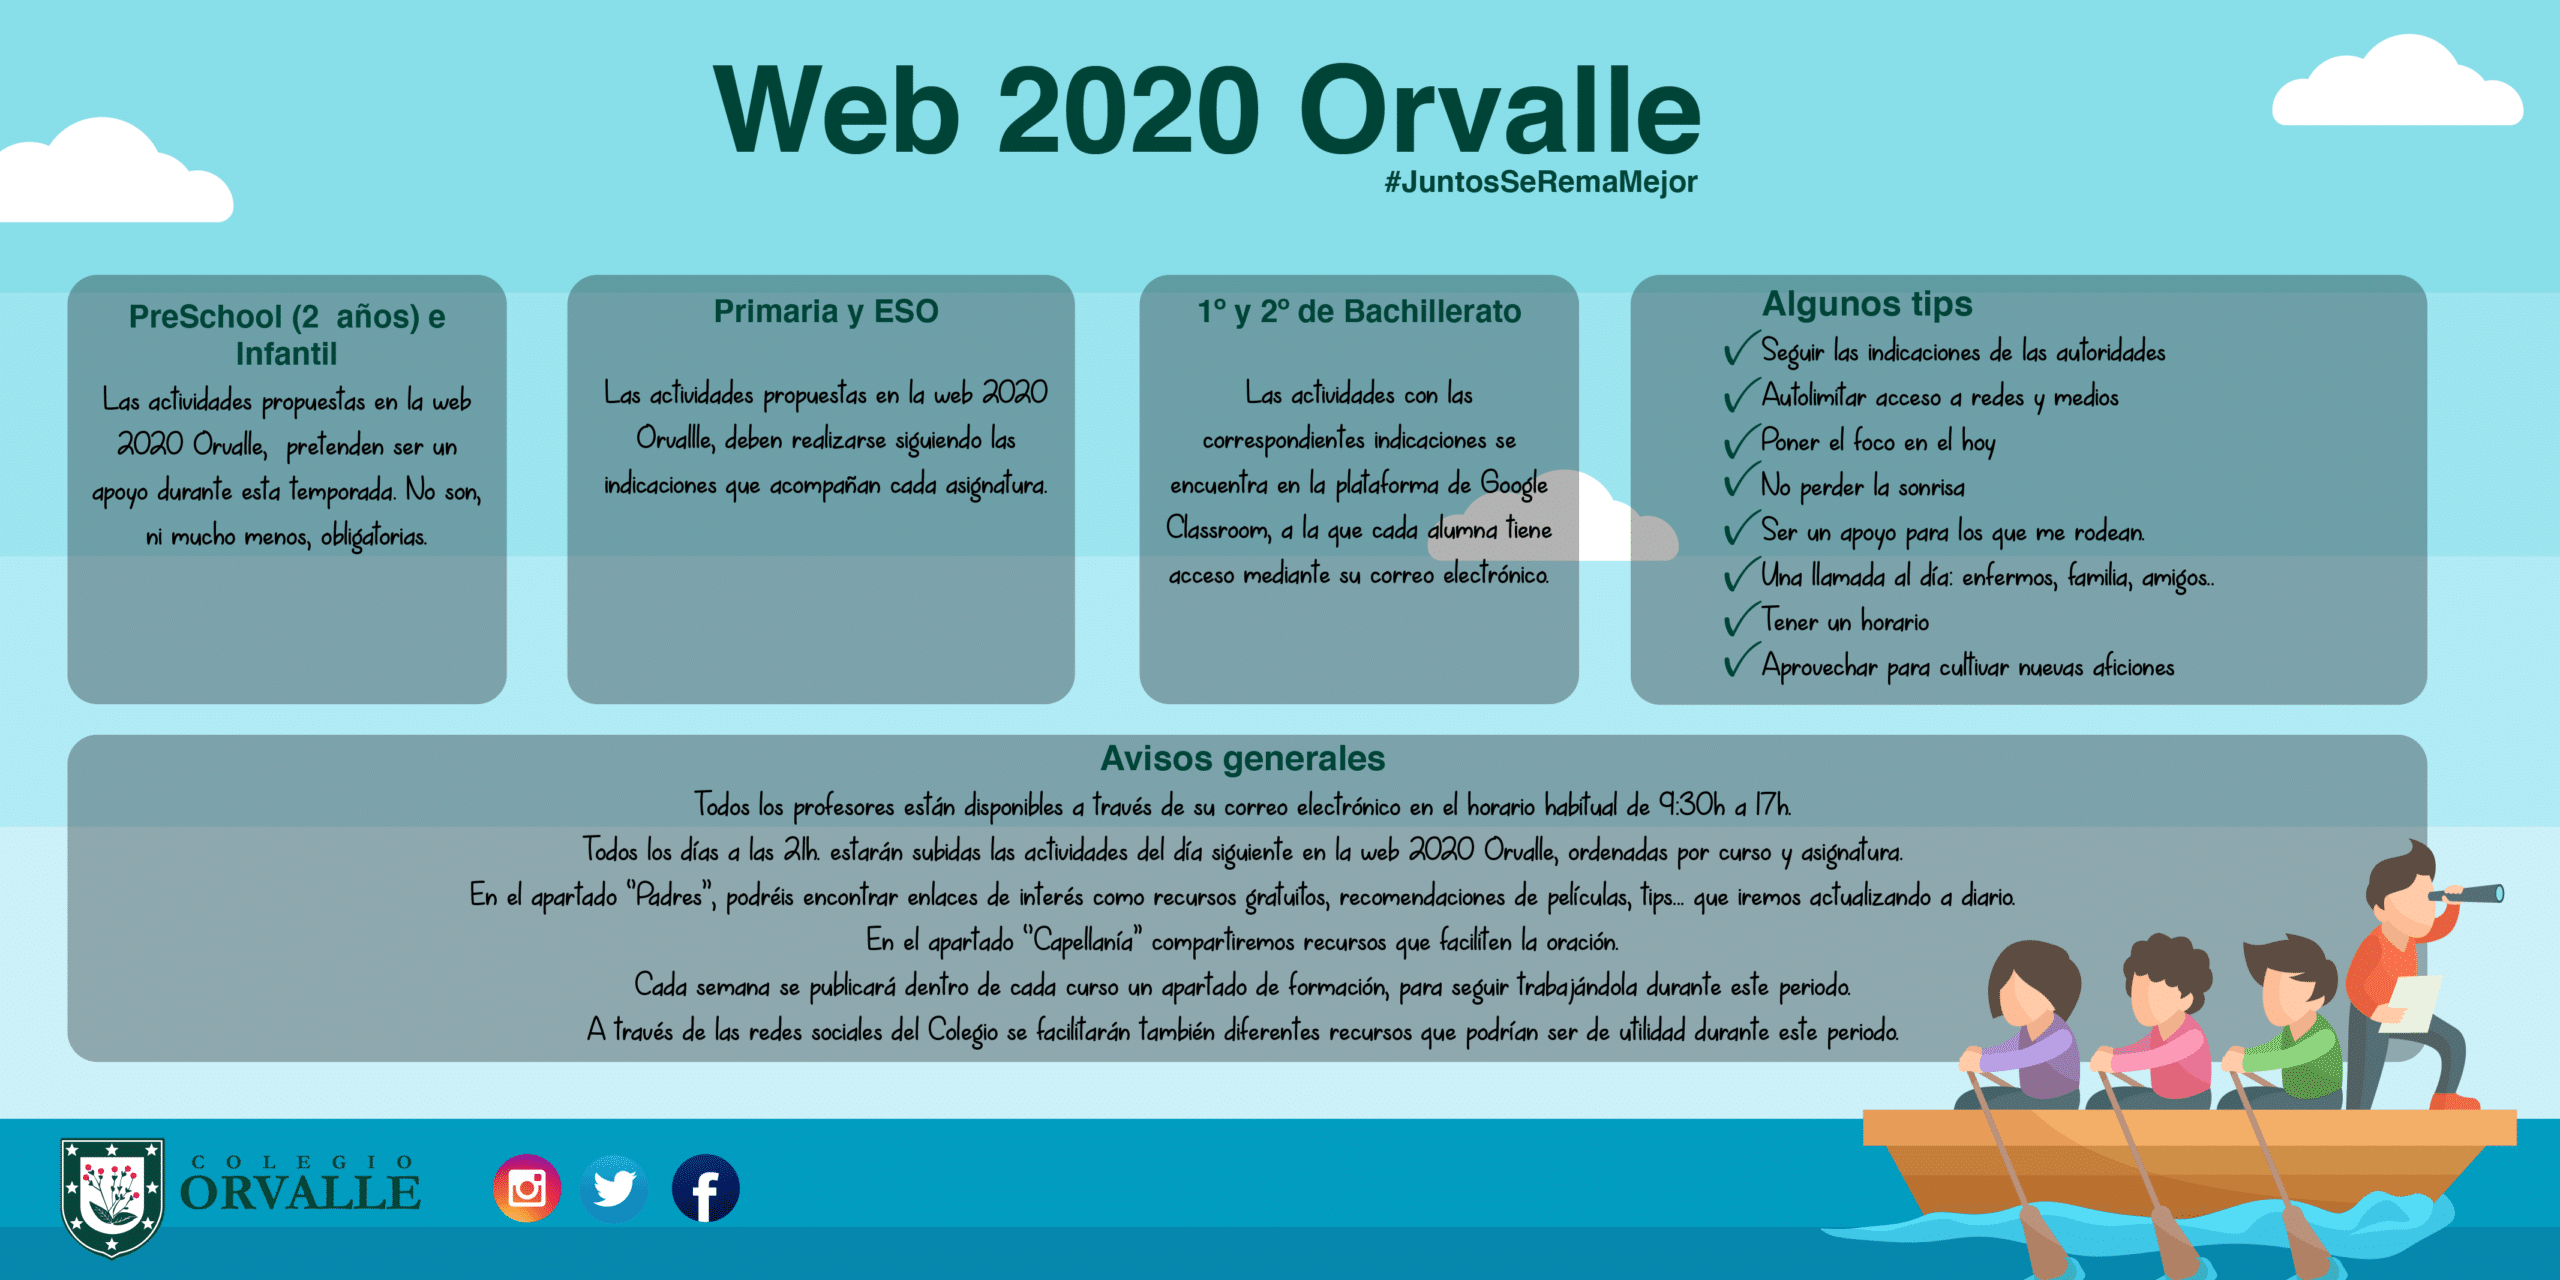 Web 2020 Orvalle